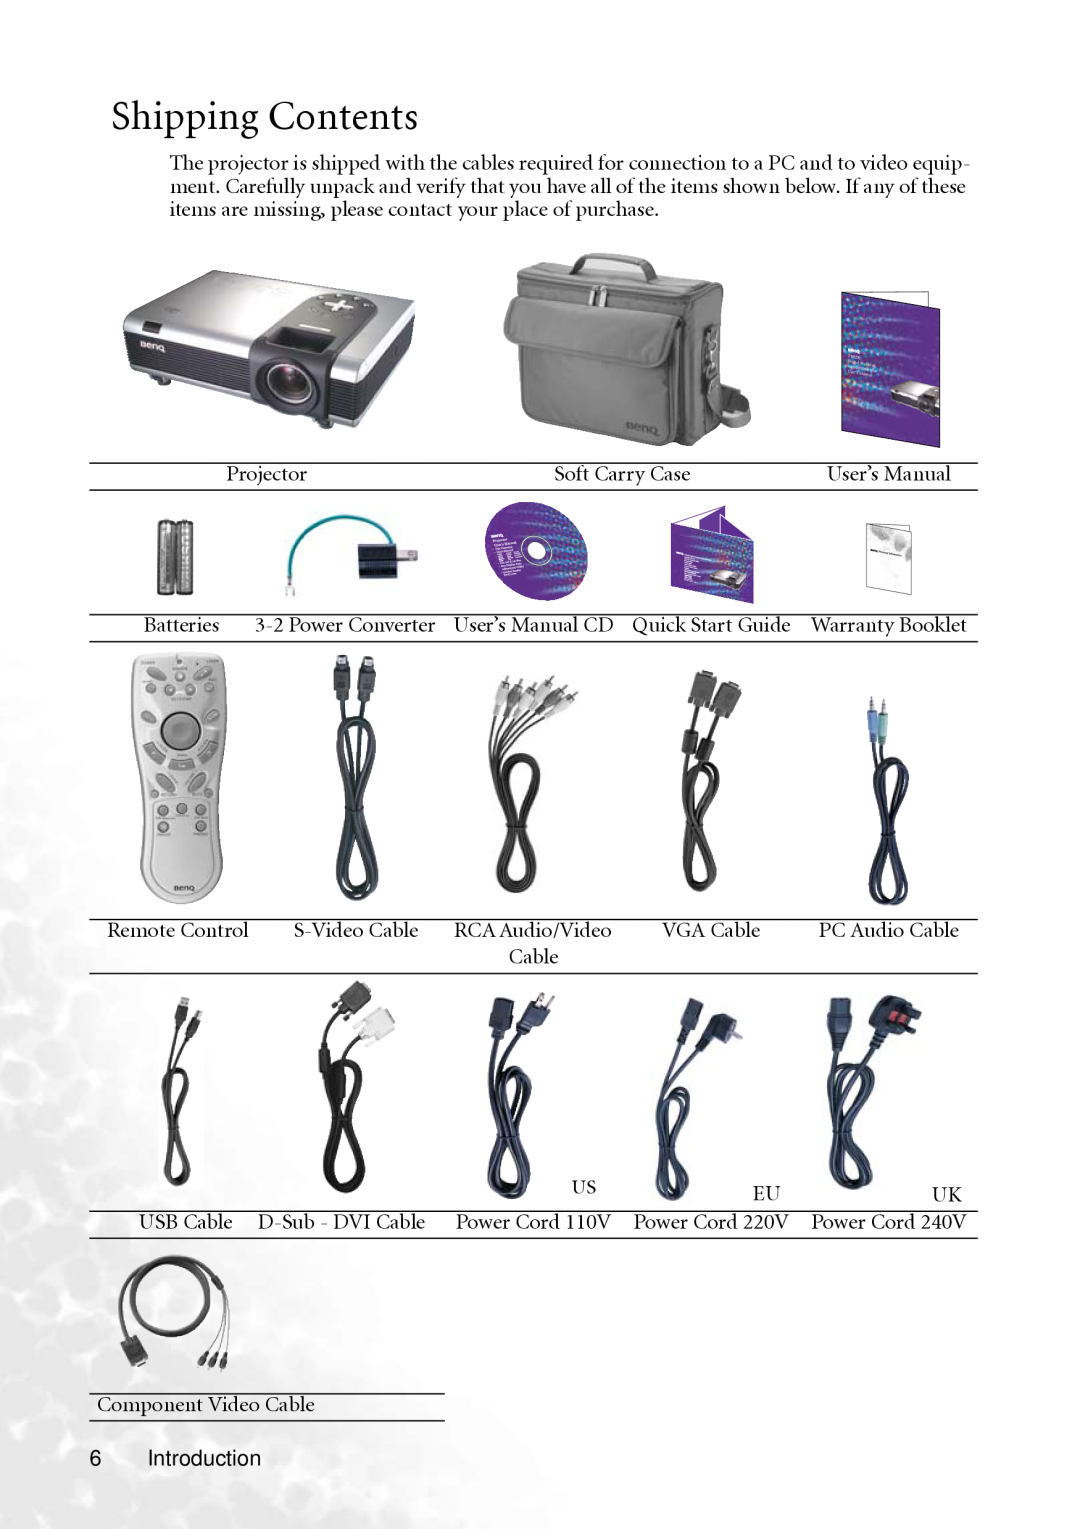 BenQ PB8240, PB8250 user manual Shipping Contents, Projector, Soft Carry Case, User’s Manual 